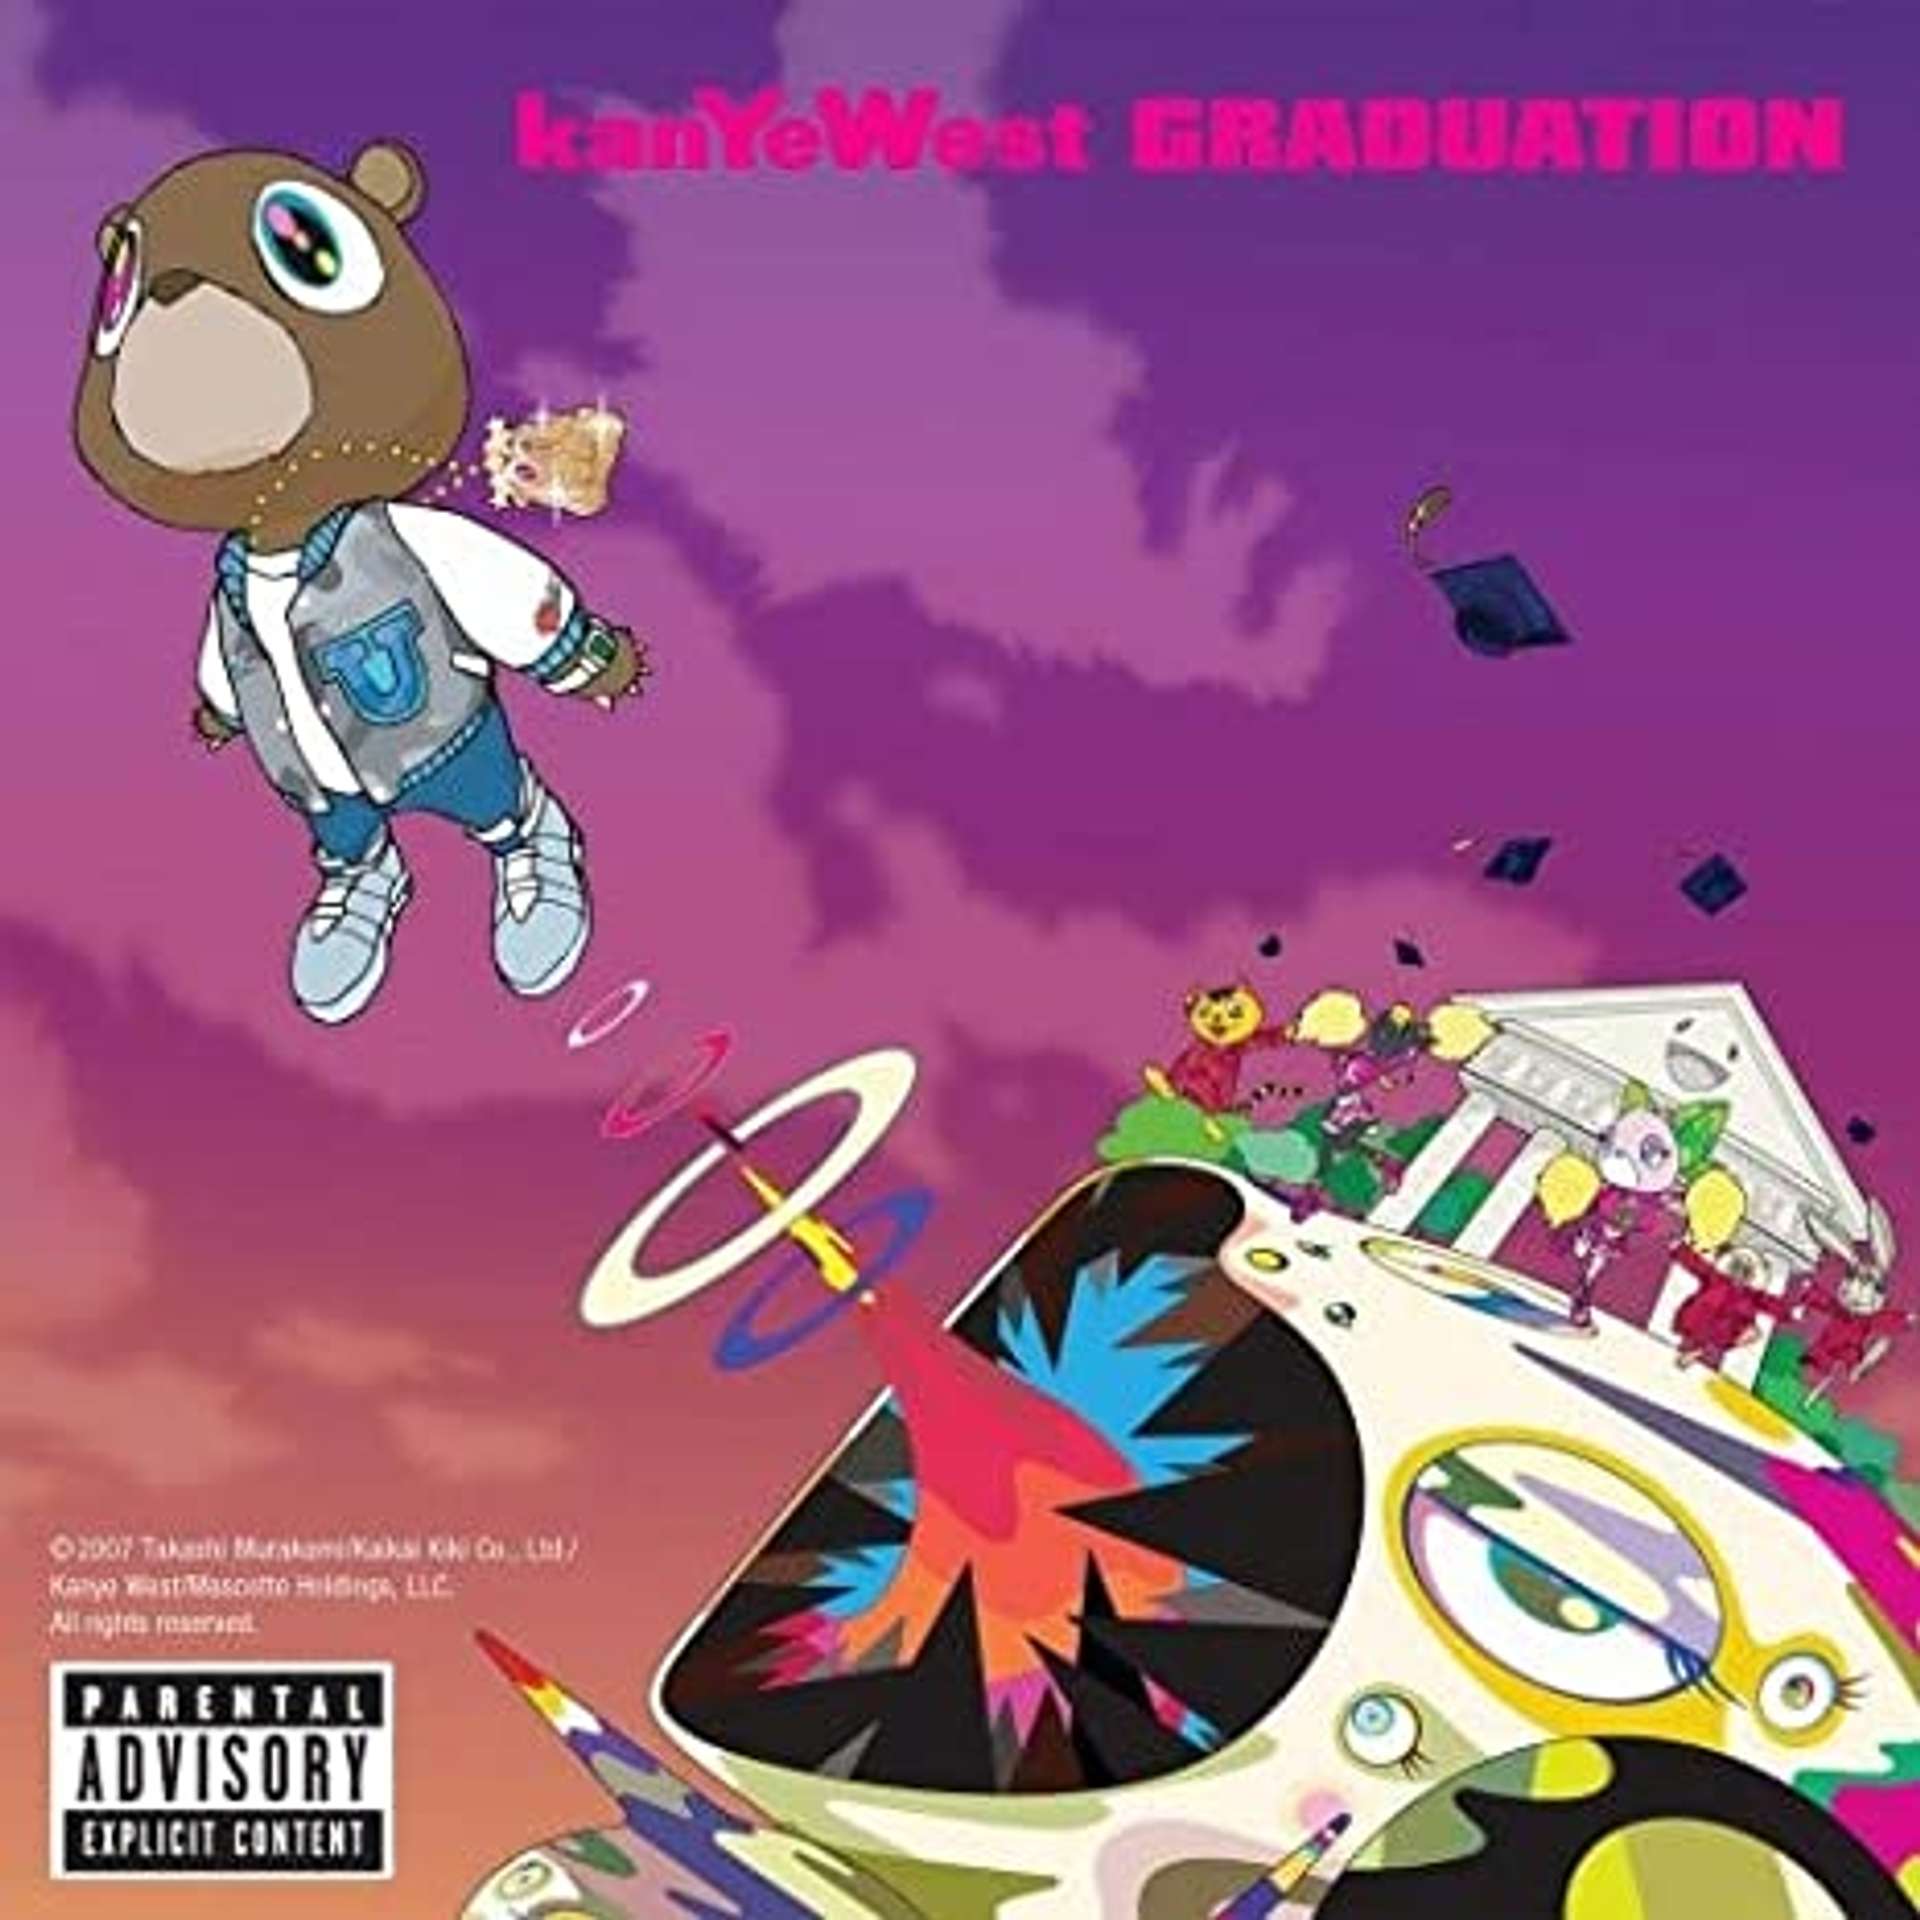 An image of the album cover for Graduation by rapper Kanye West, done by artist Takashi Murakami. It depicts Dropout Bear being propelled into outer space, leaving a graduation scene behind.